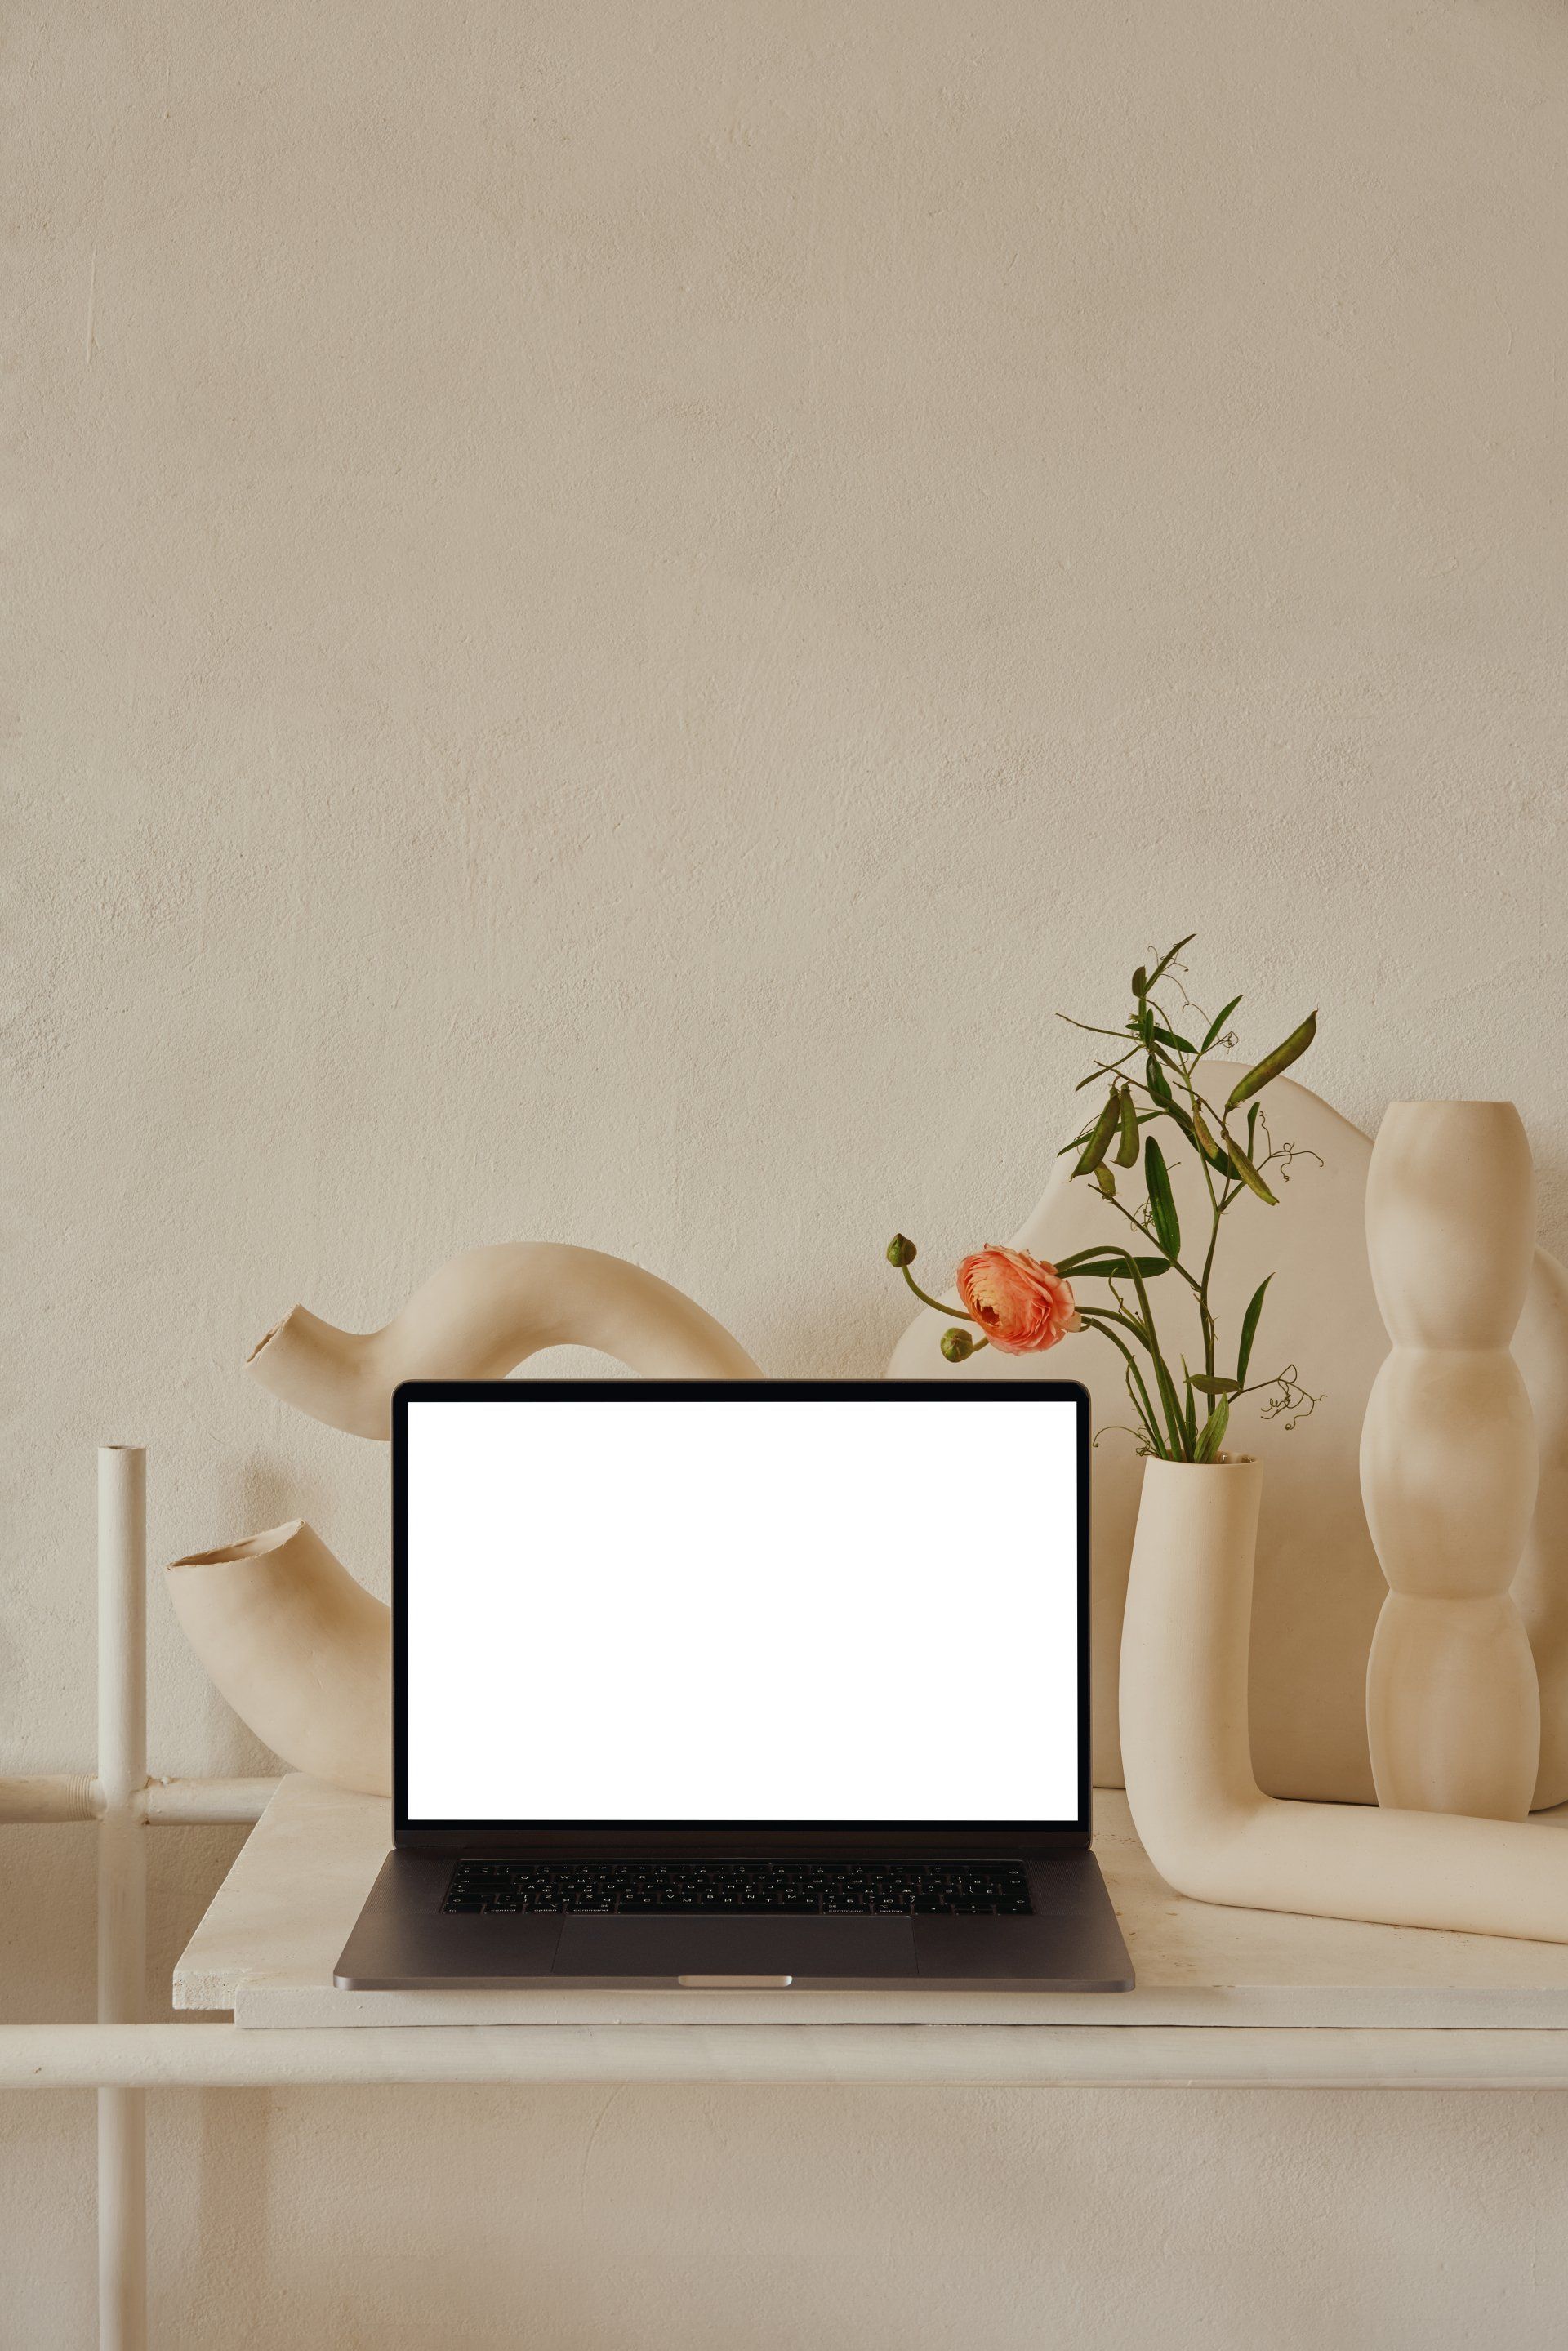 A laptop on a desk with spring flowers behind it in a vase